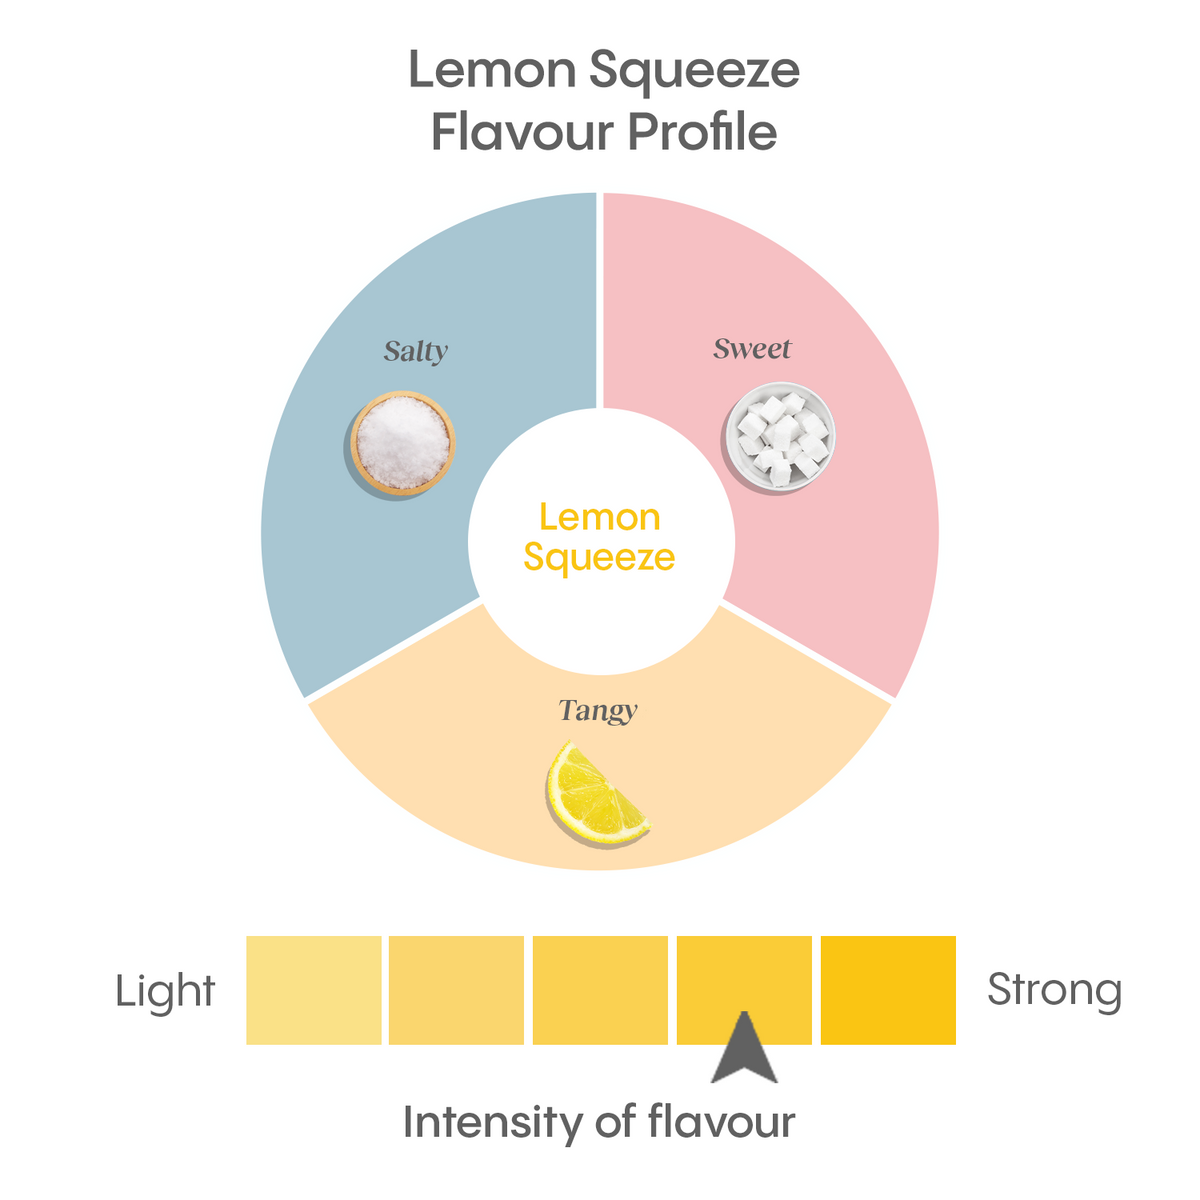 All Natural Electrolyte Powder, Shay Mitchell Lemon Squeeze